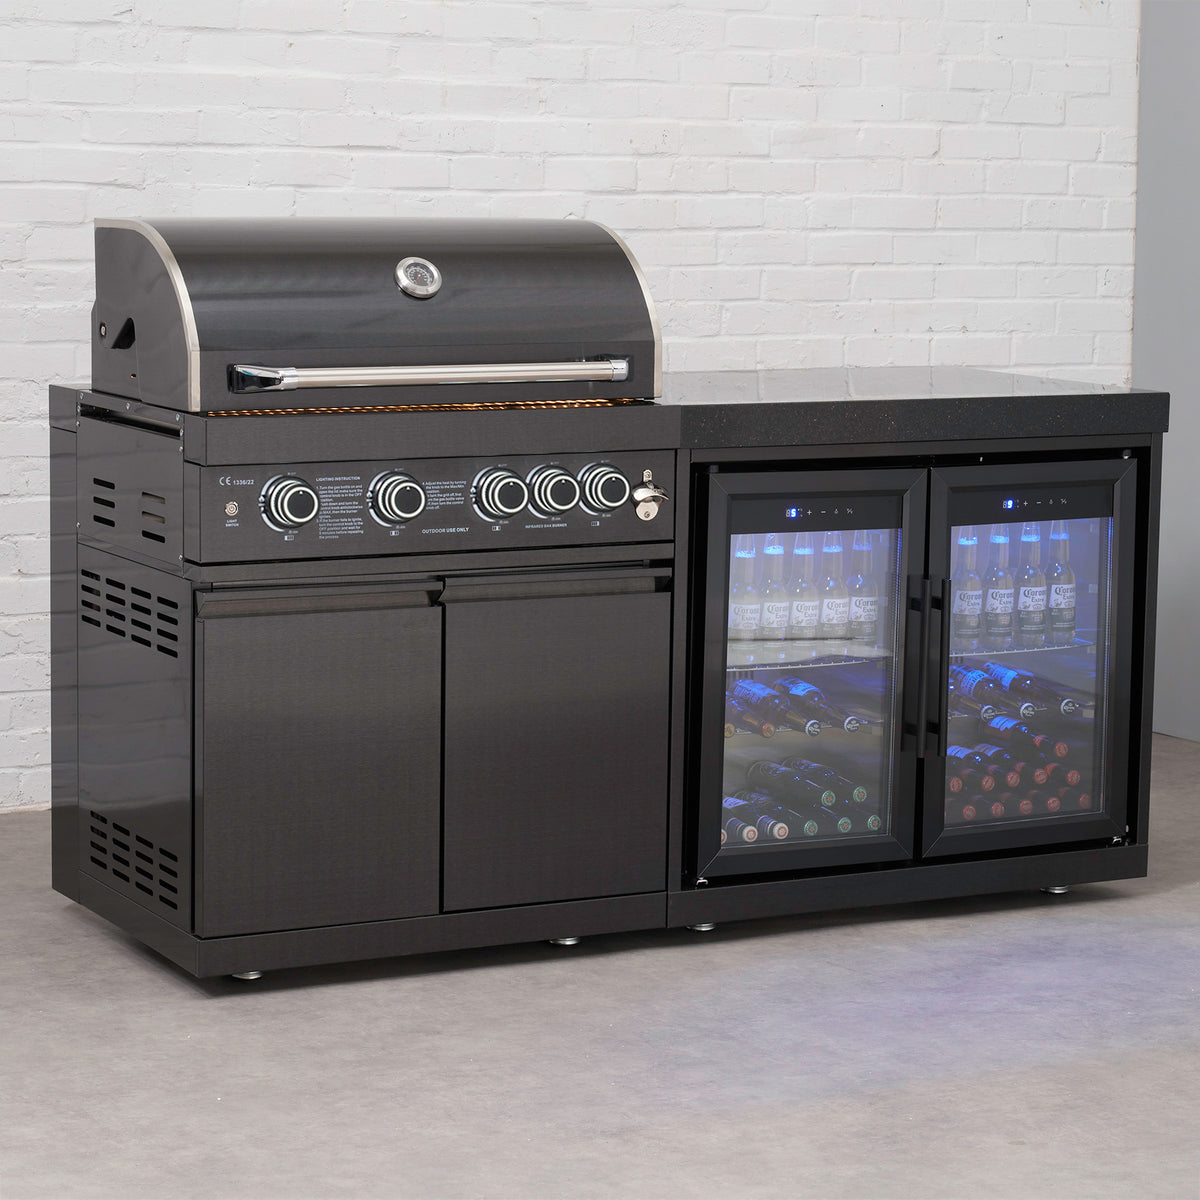 Draco Grills 4 Burner BBQ Black Stainless Steel Modular Outdoor Kitchen with Double Fridge